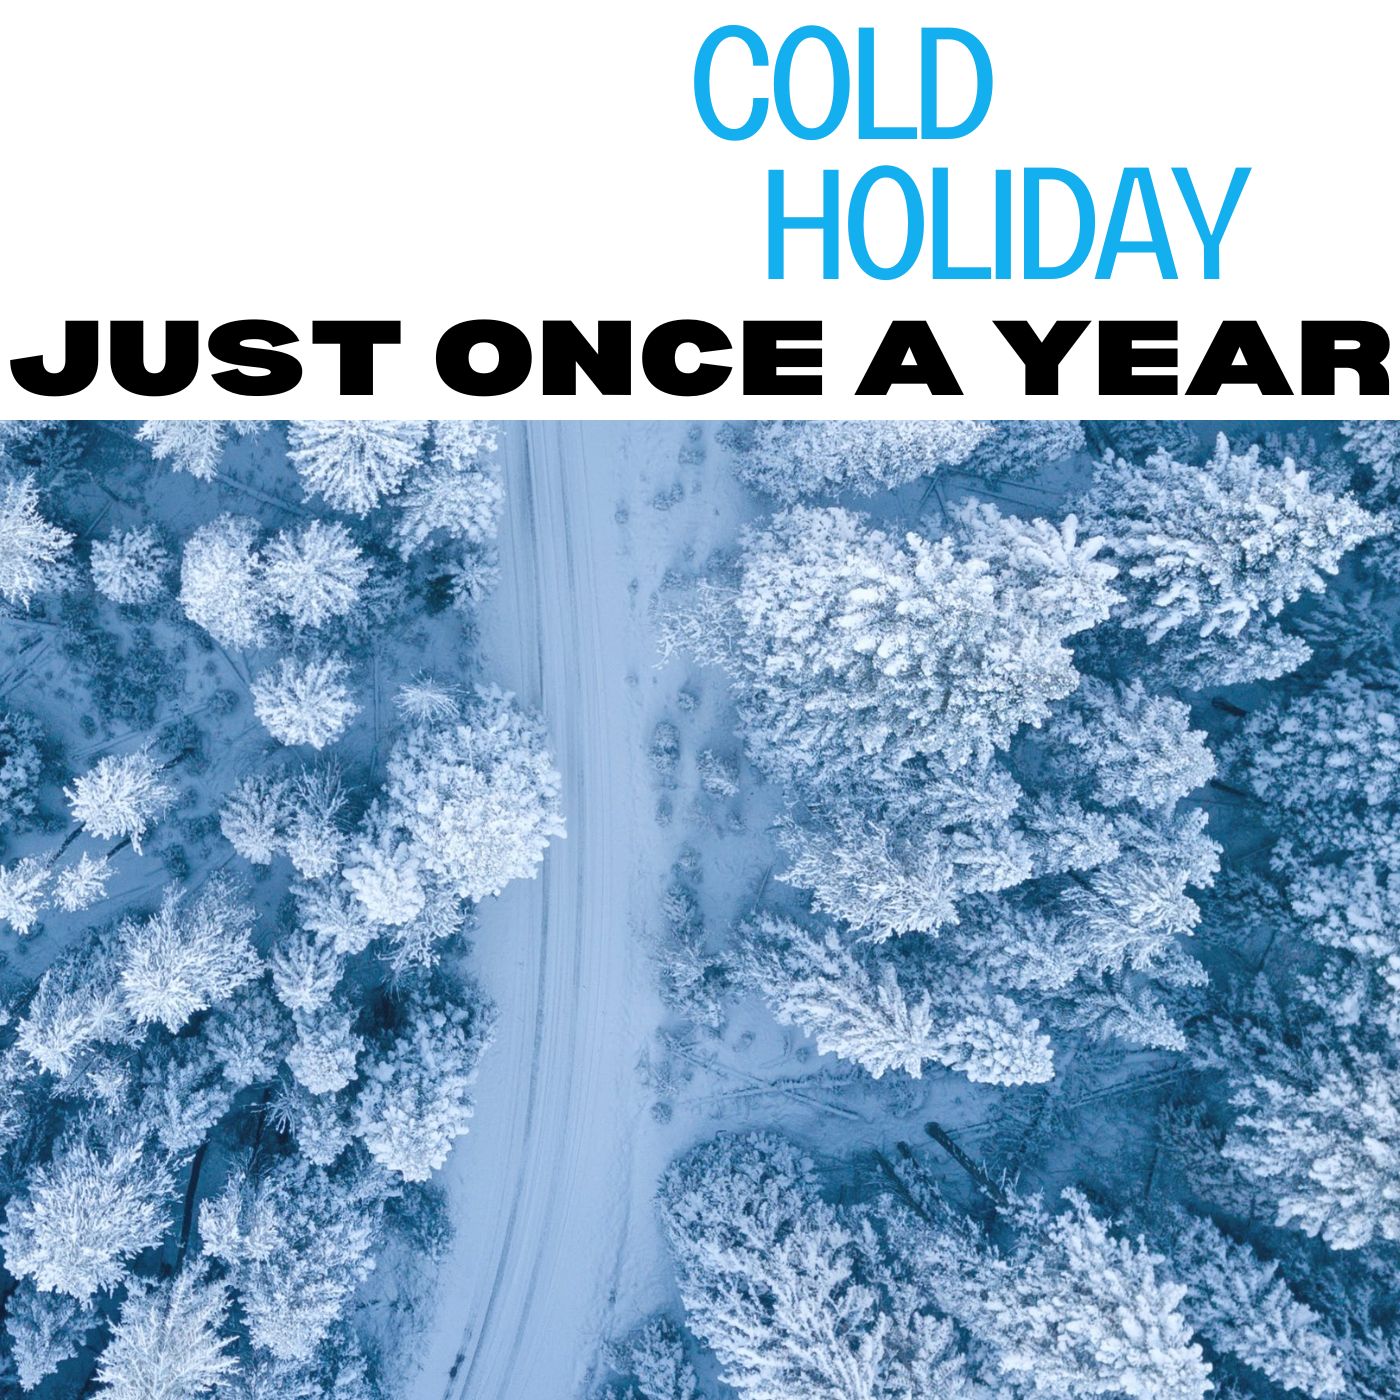 The cover of the Just Once A Year single by Cold Holiday.